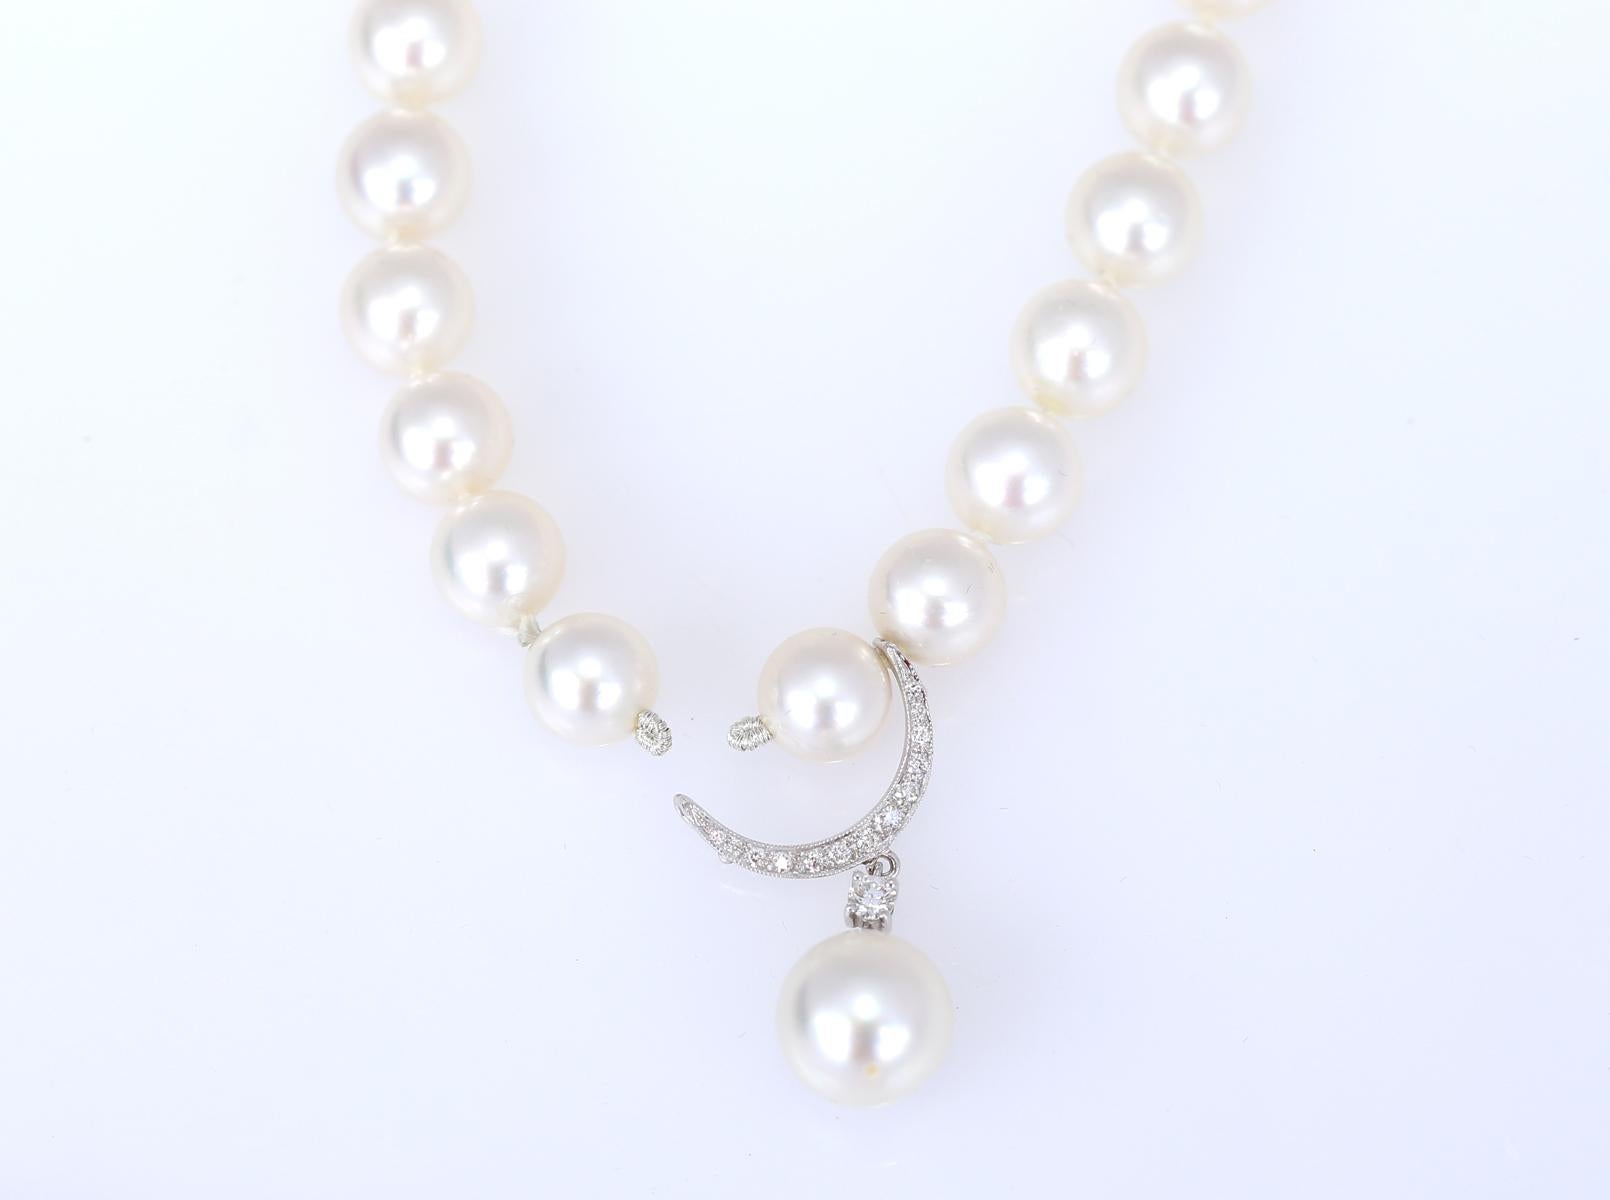 Pearls Diamonds 2.5 Carat Necklace AAA Quality, 2020 For Sale 6